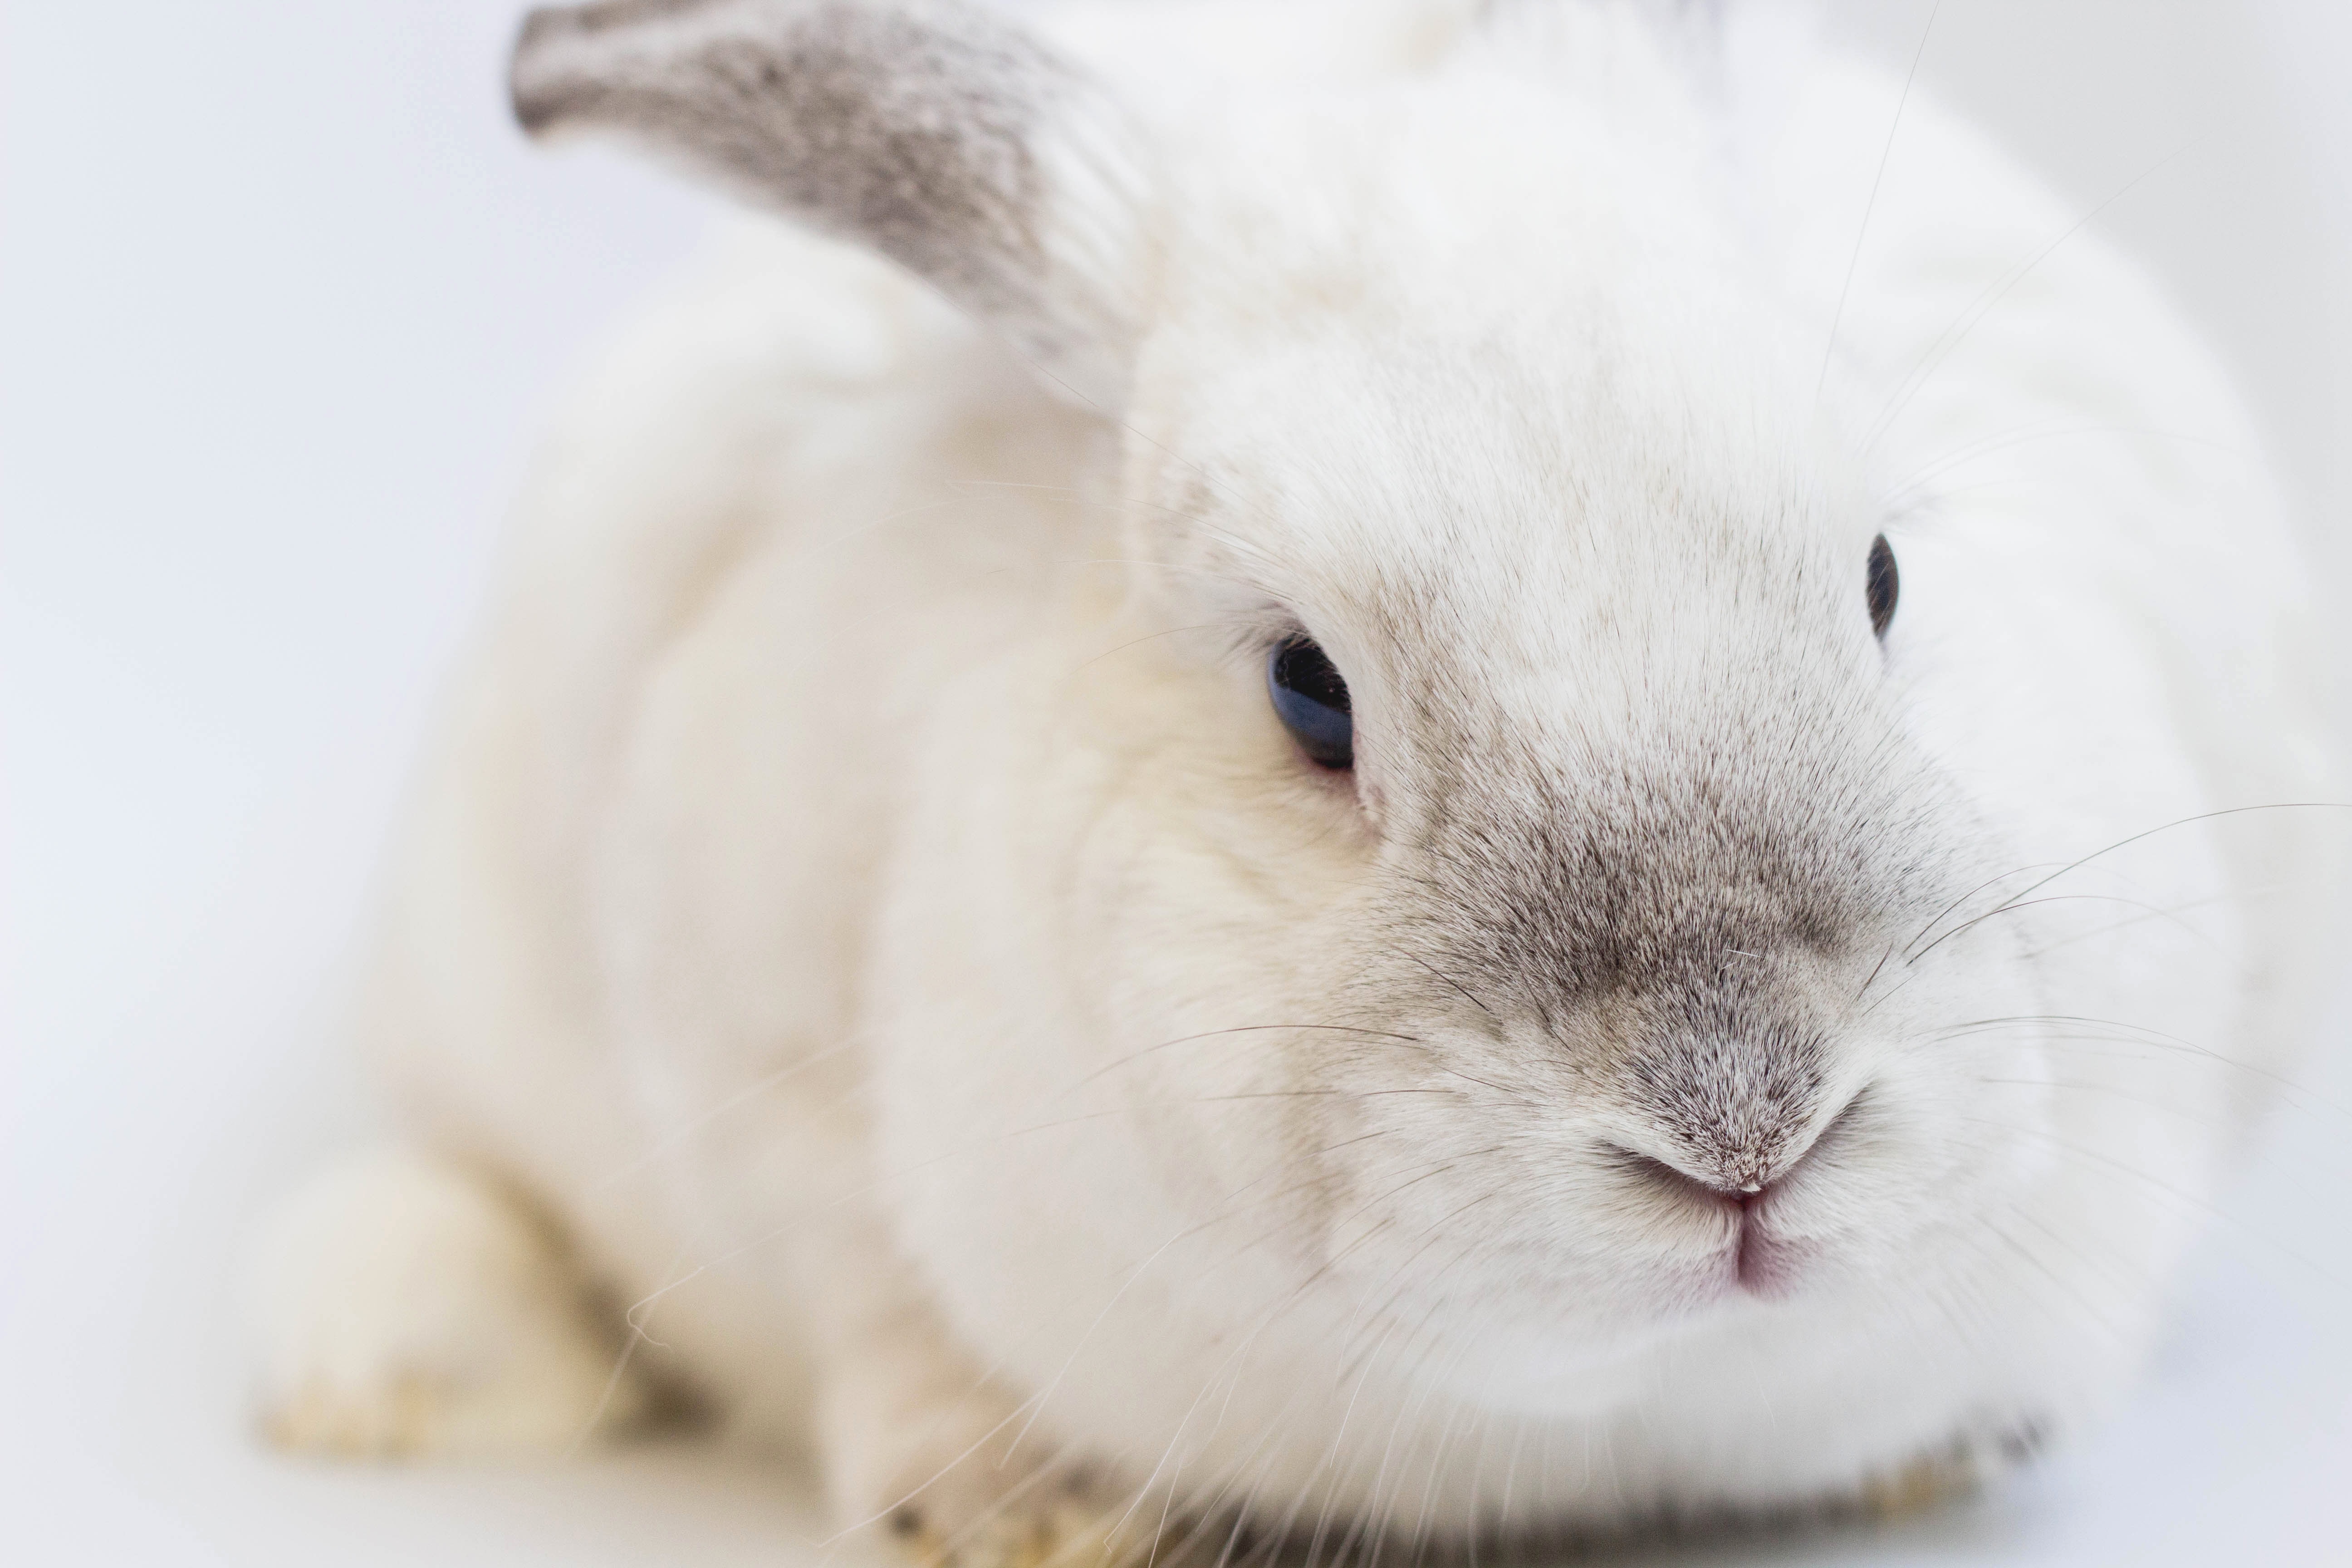 Thousands sign a petition to stop animal testing at the University of  Bristol